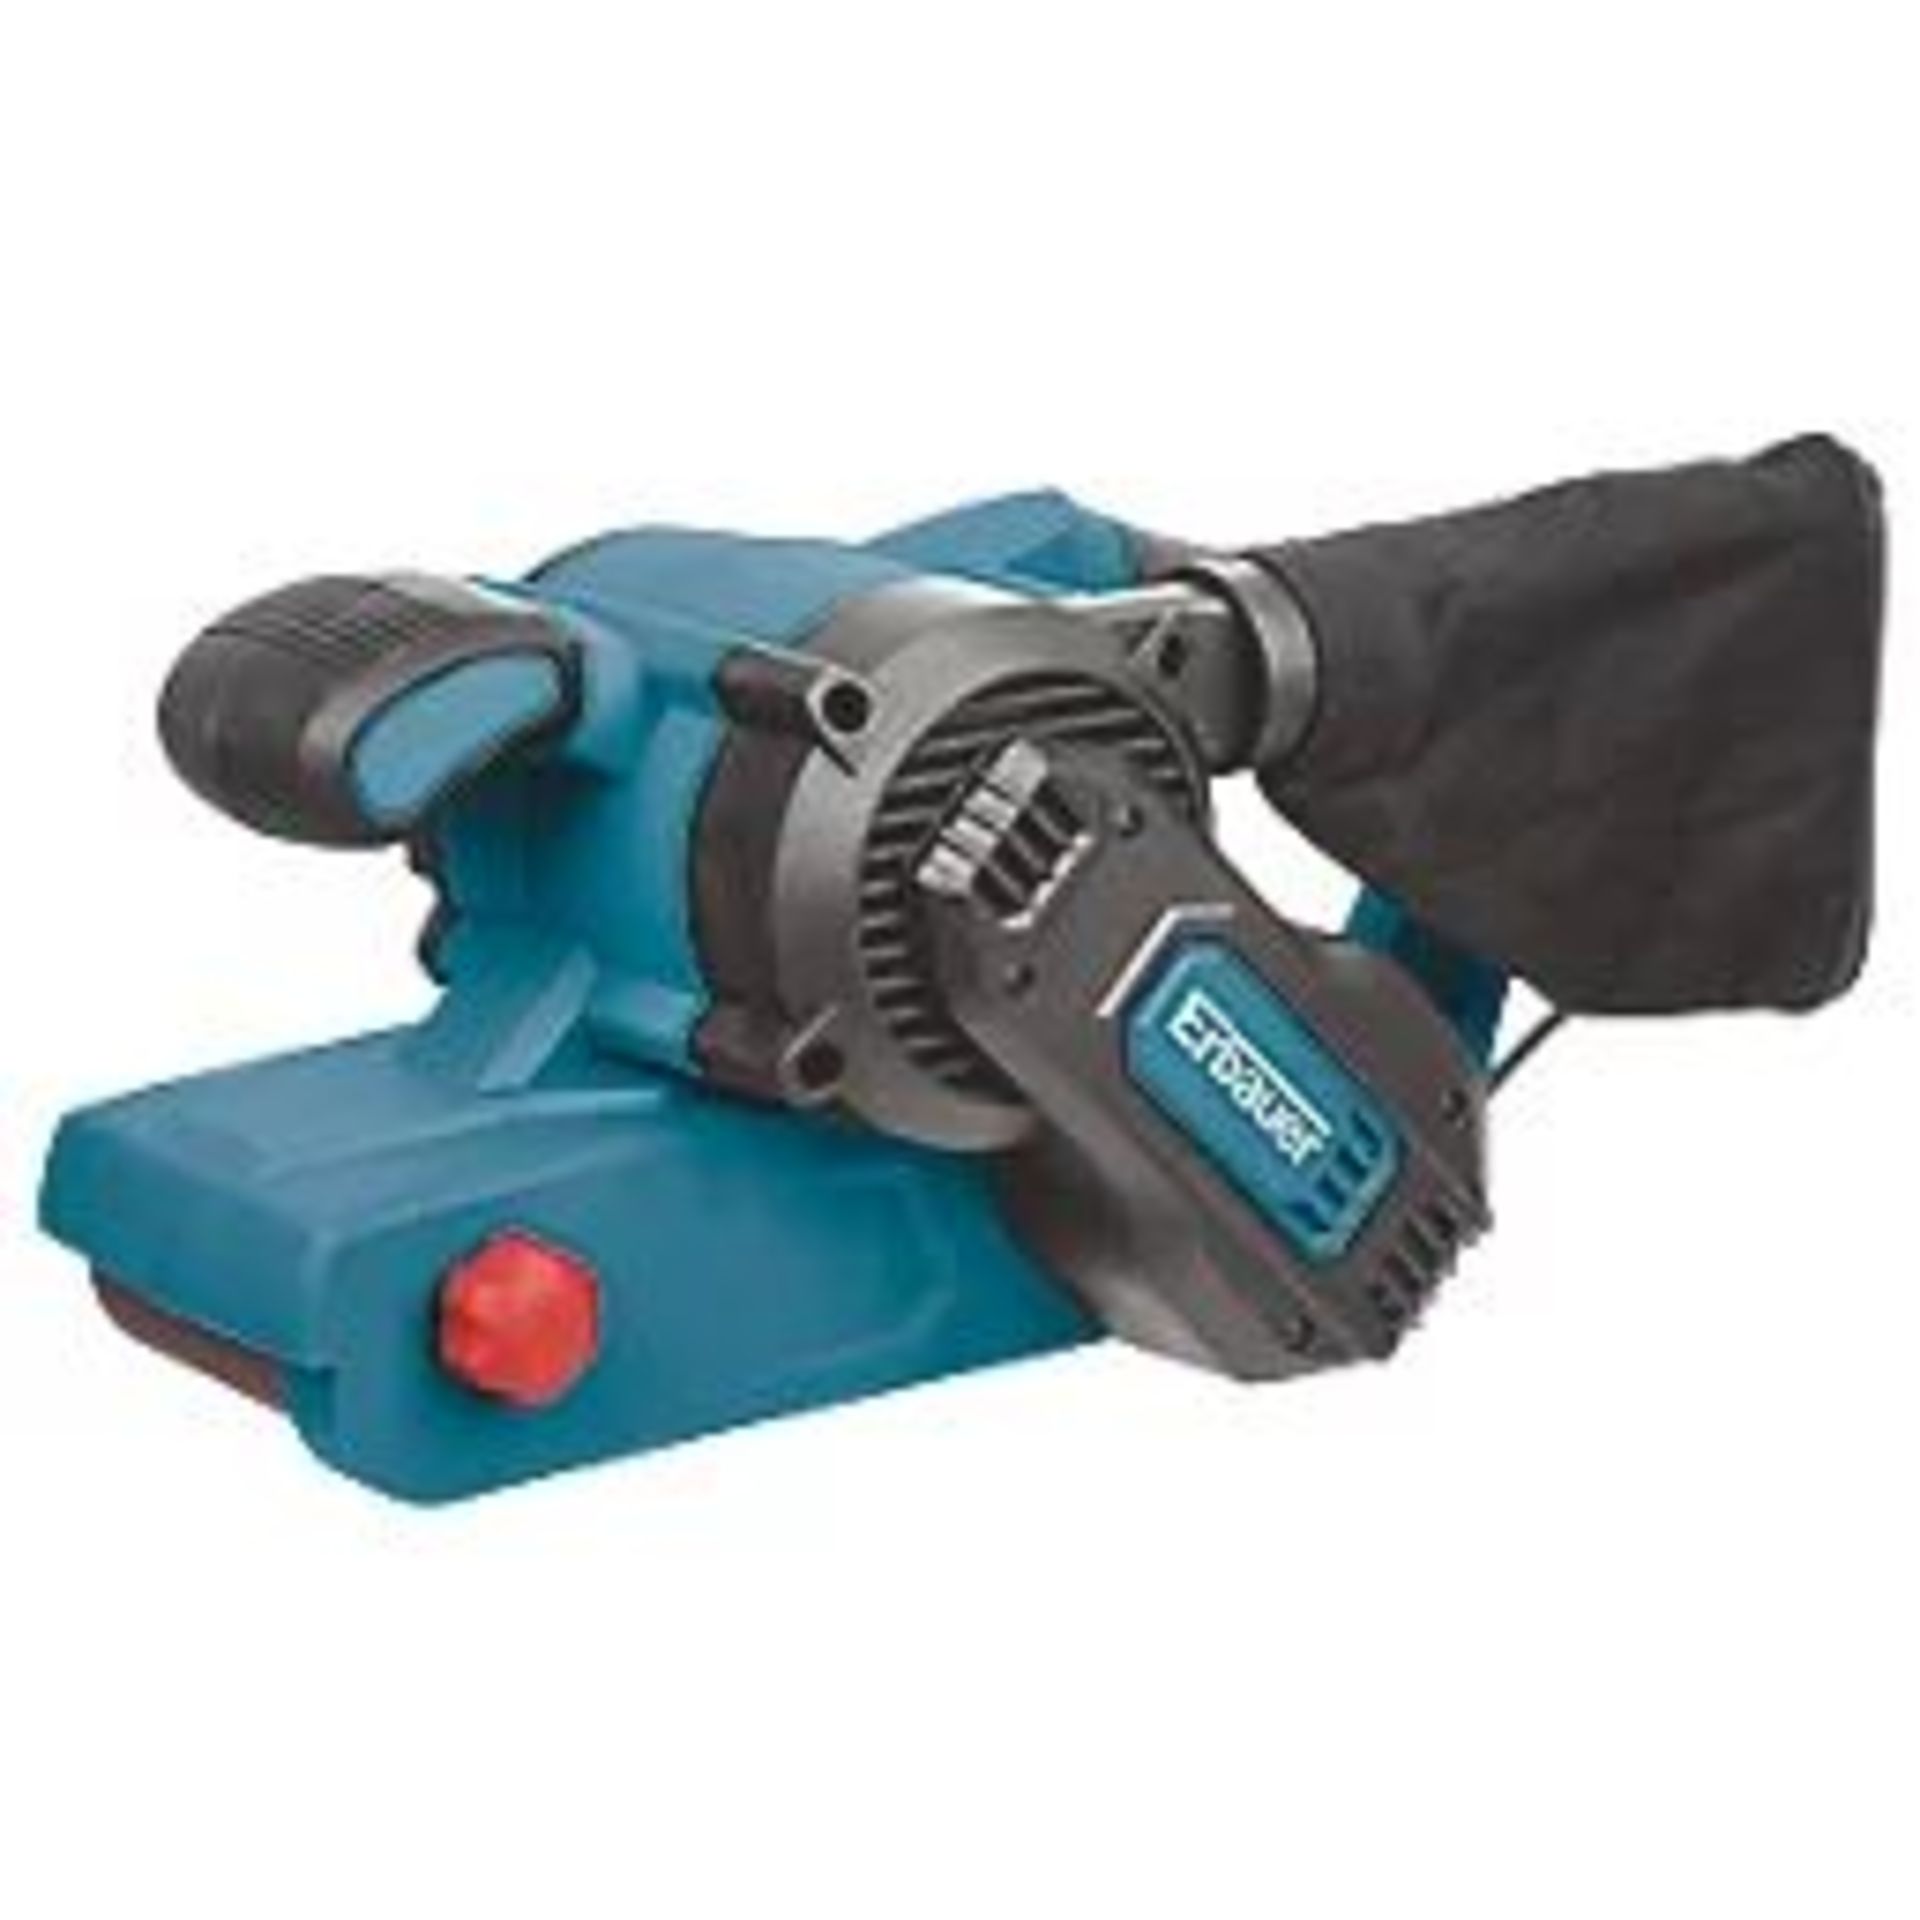 ERBAUER EBS950 3" ELECTRIC BELT SANDER 220-240V. - P4. Powerful and versatile with variable speed